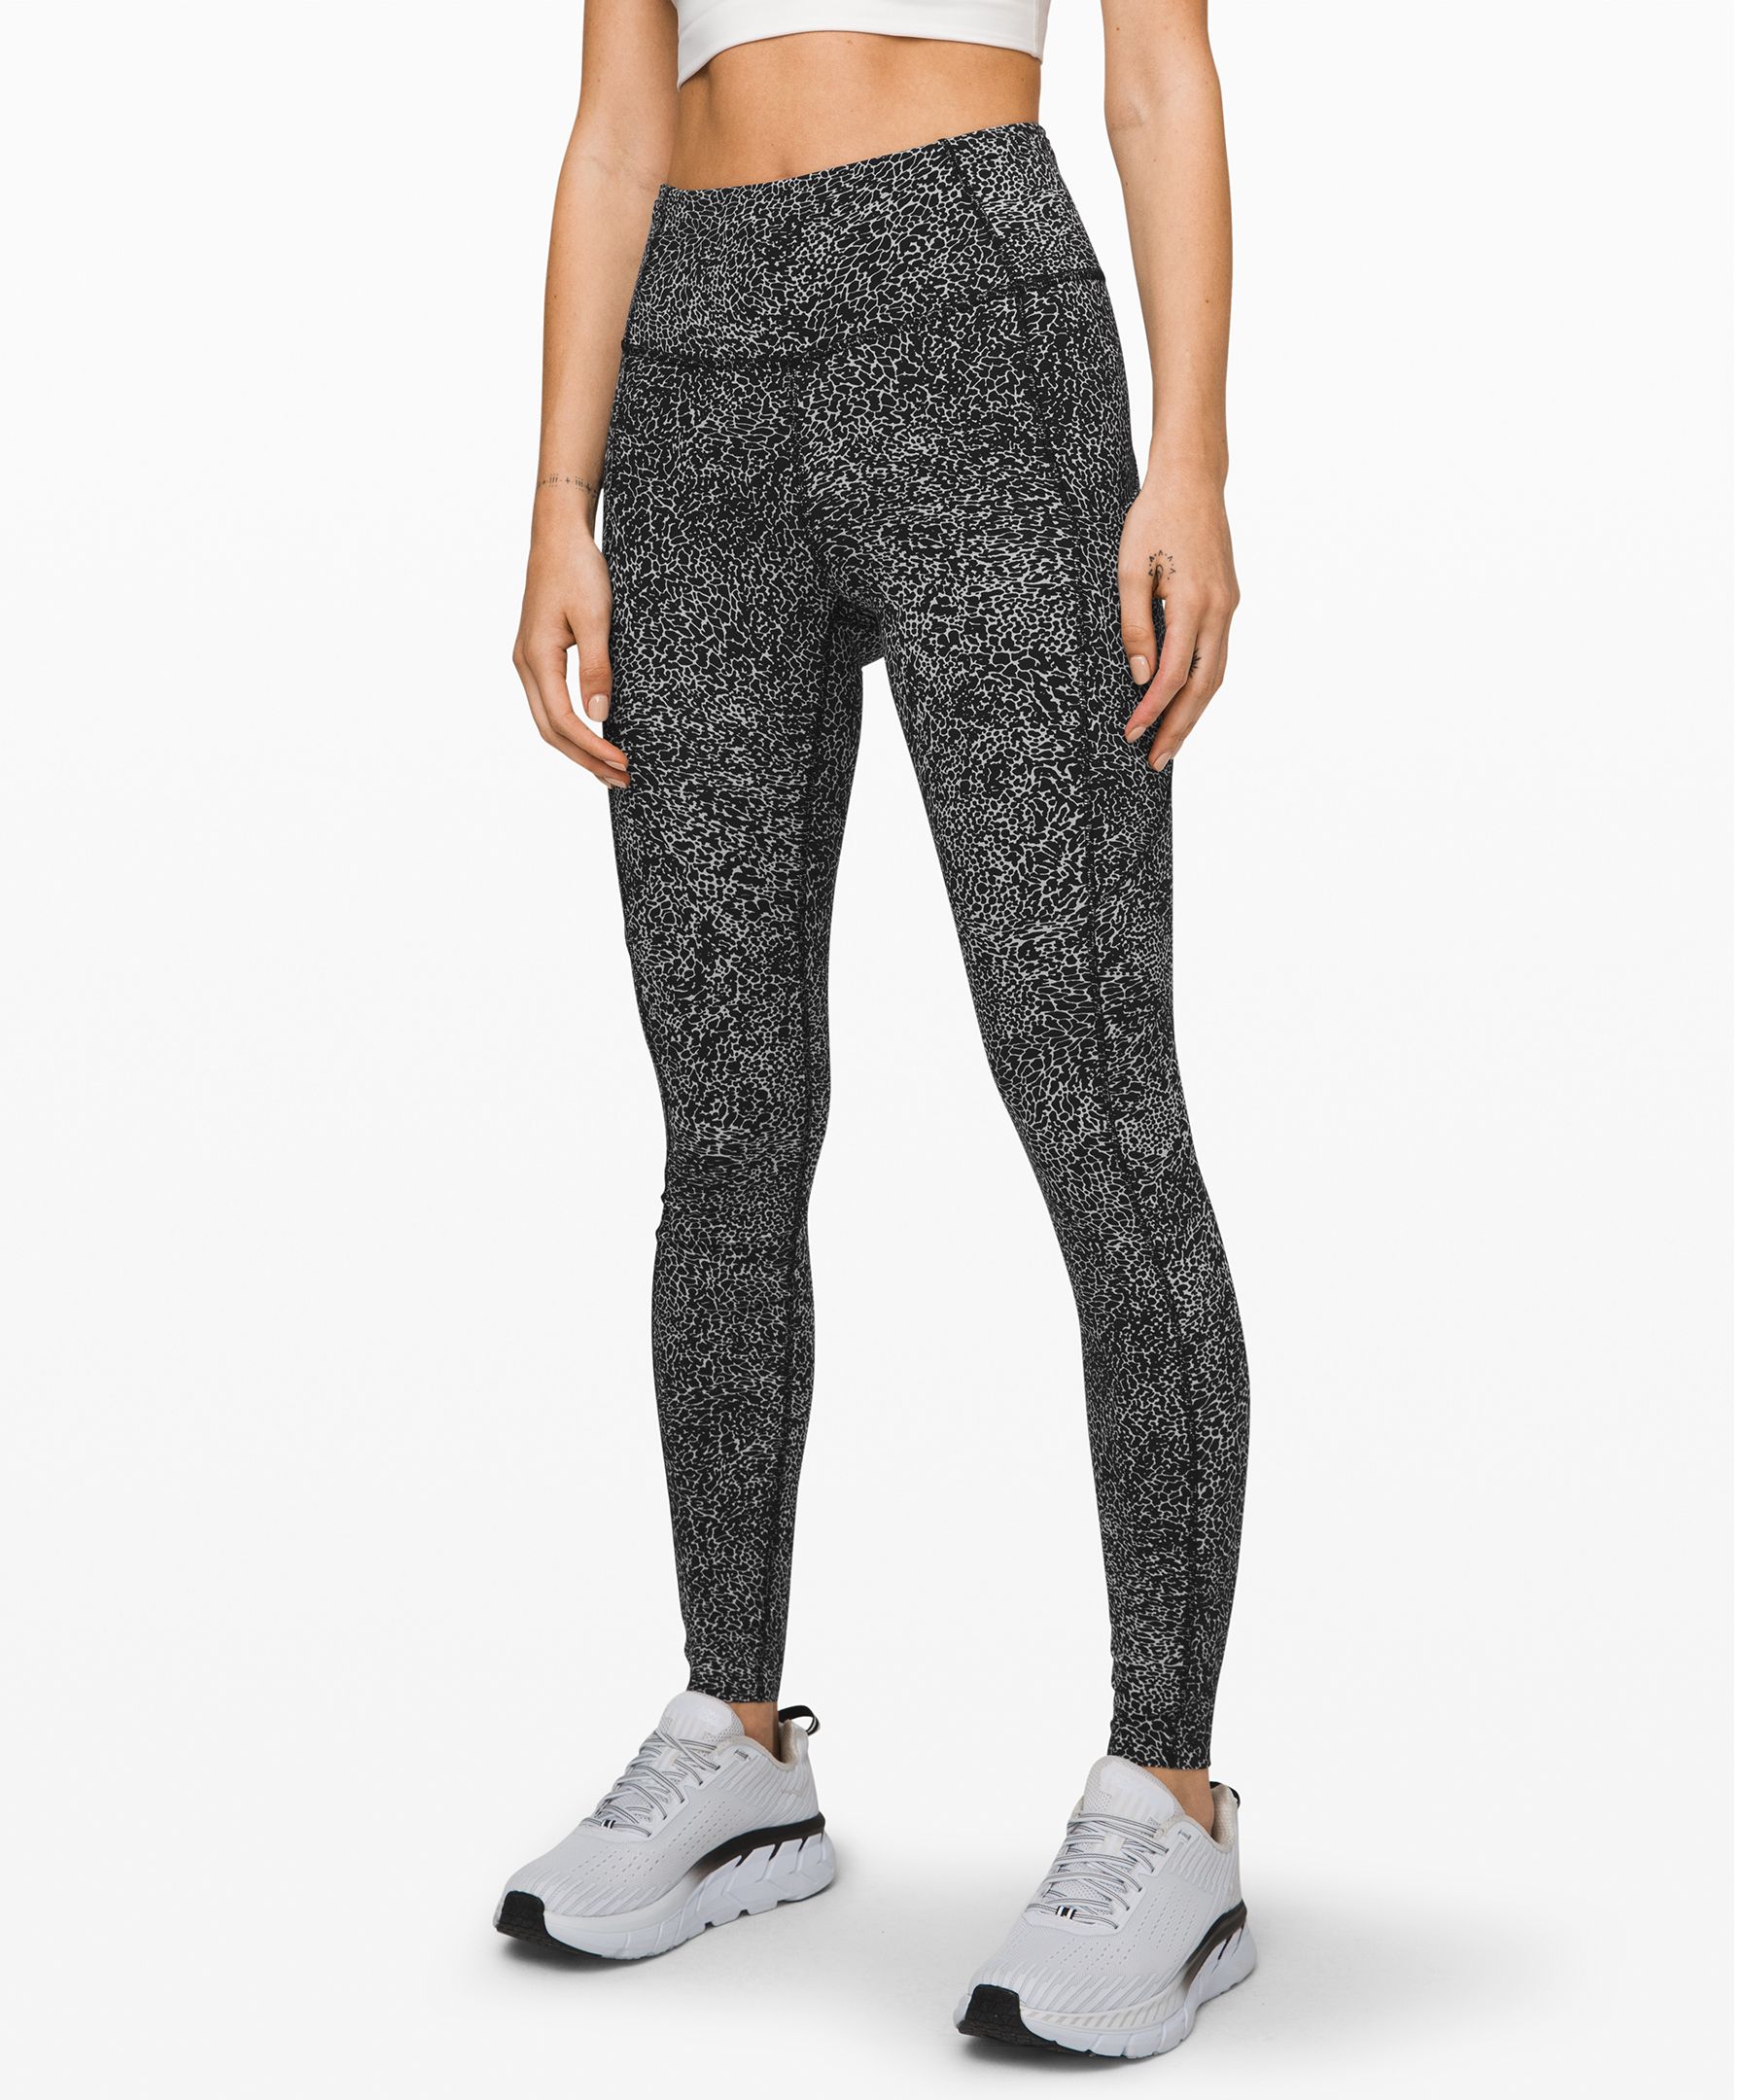 Lululemon Fast And Free Tight 28" *non-reflective In Polar Shift Ice Grey Black